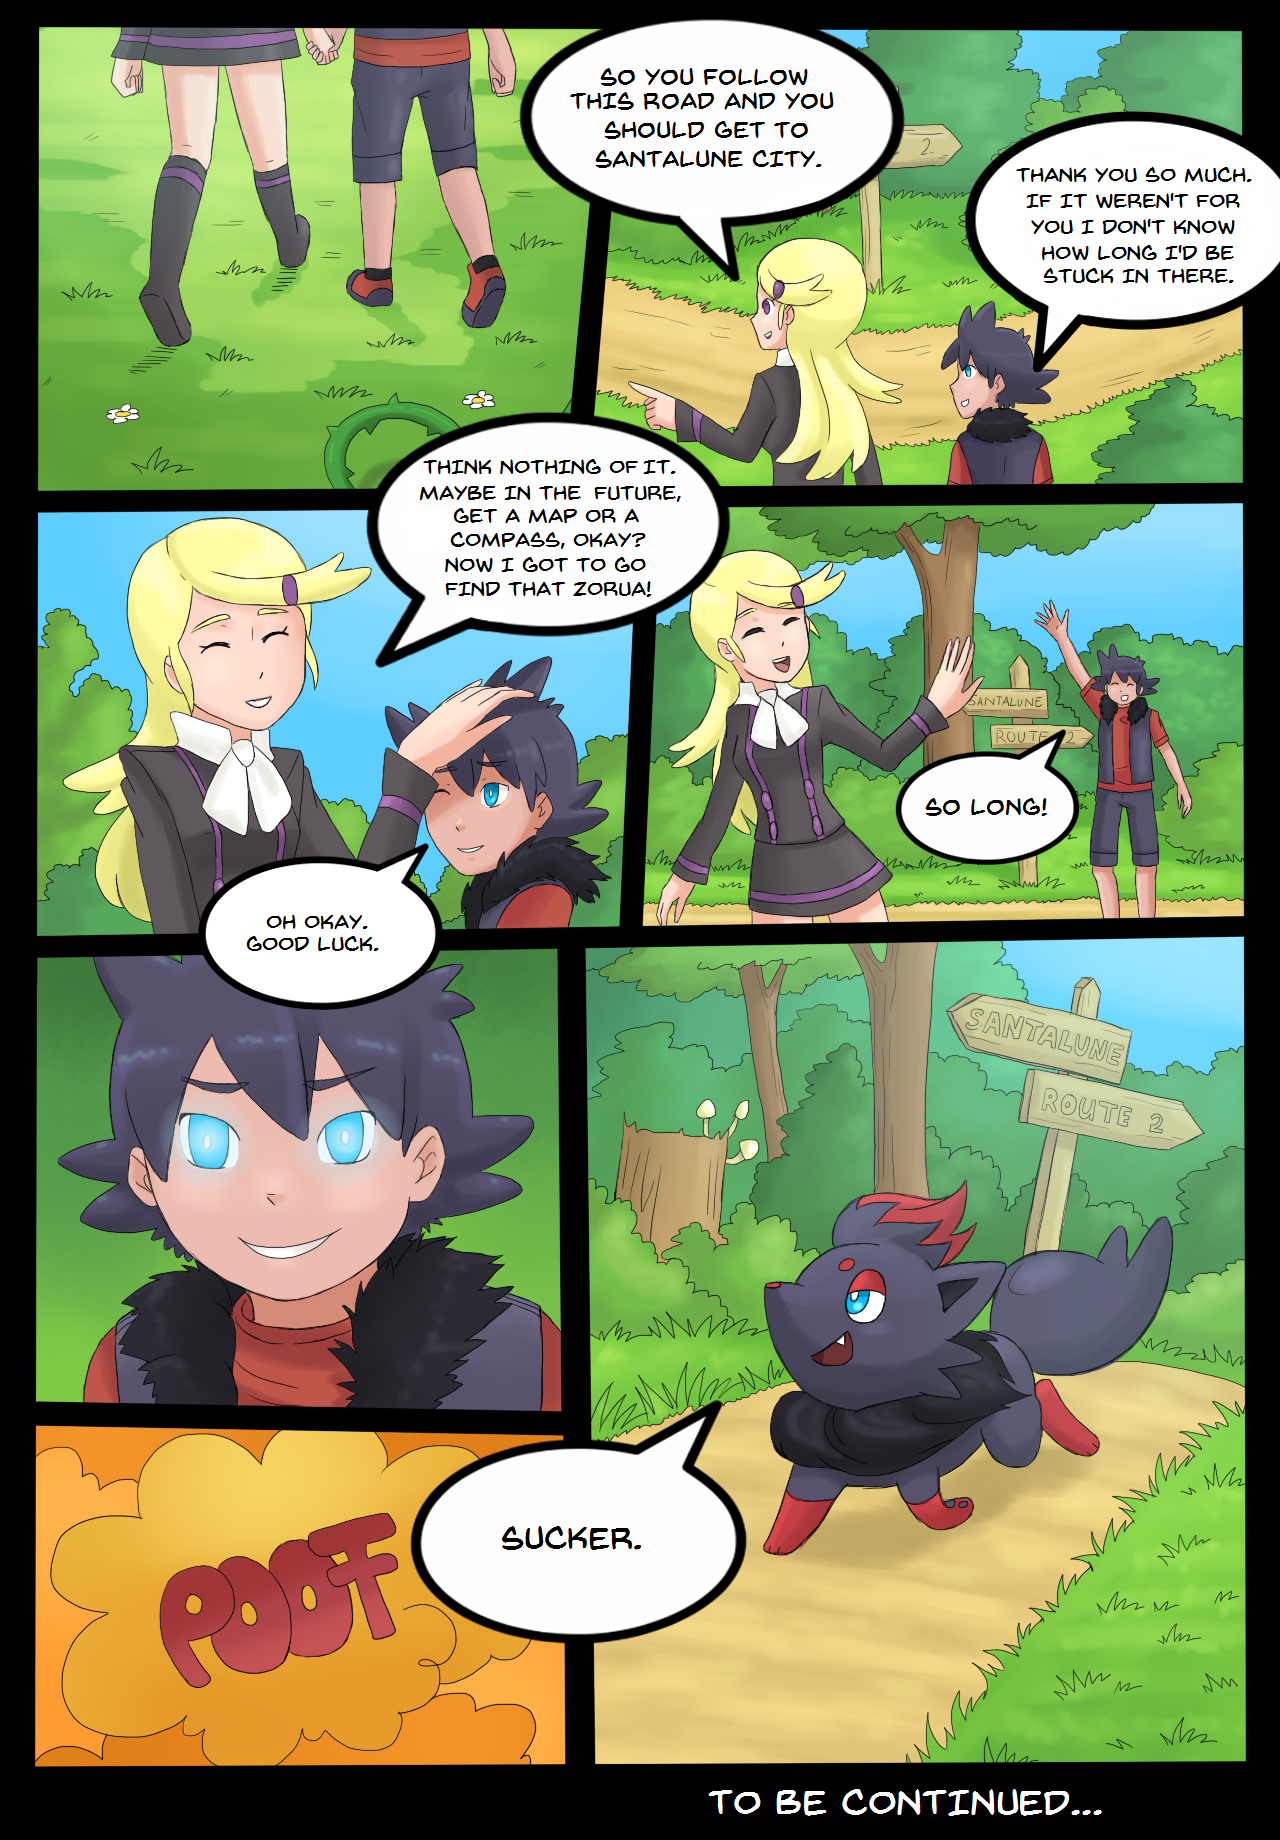 Hide and Seek with Cain Page 3/3